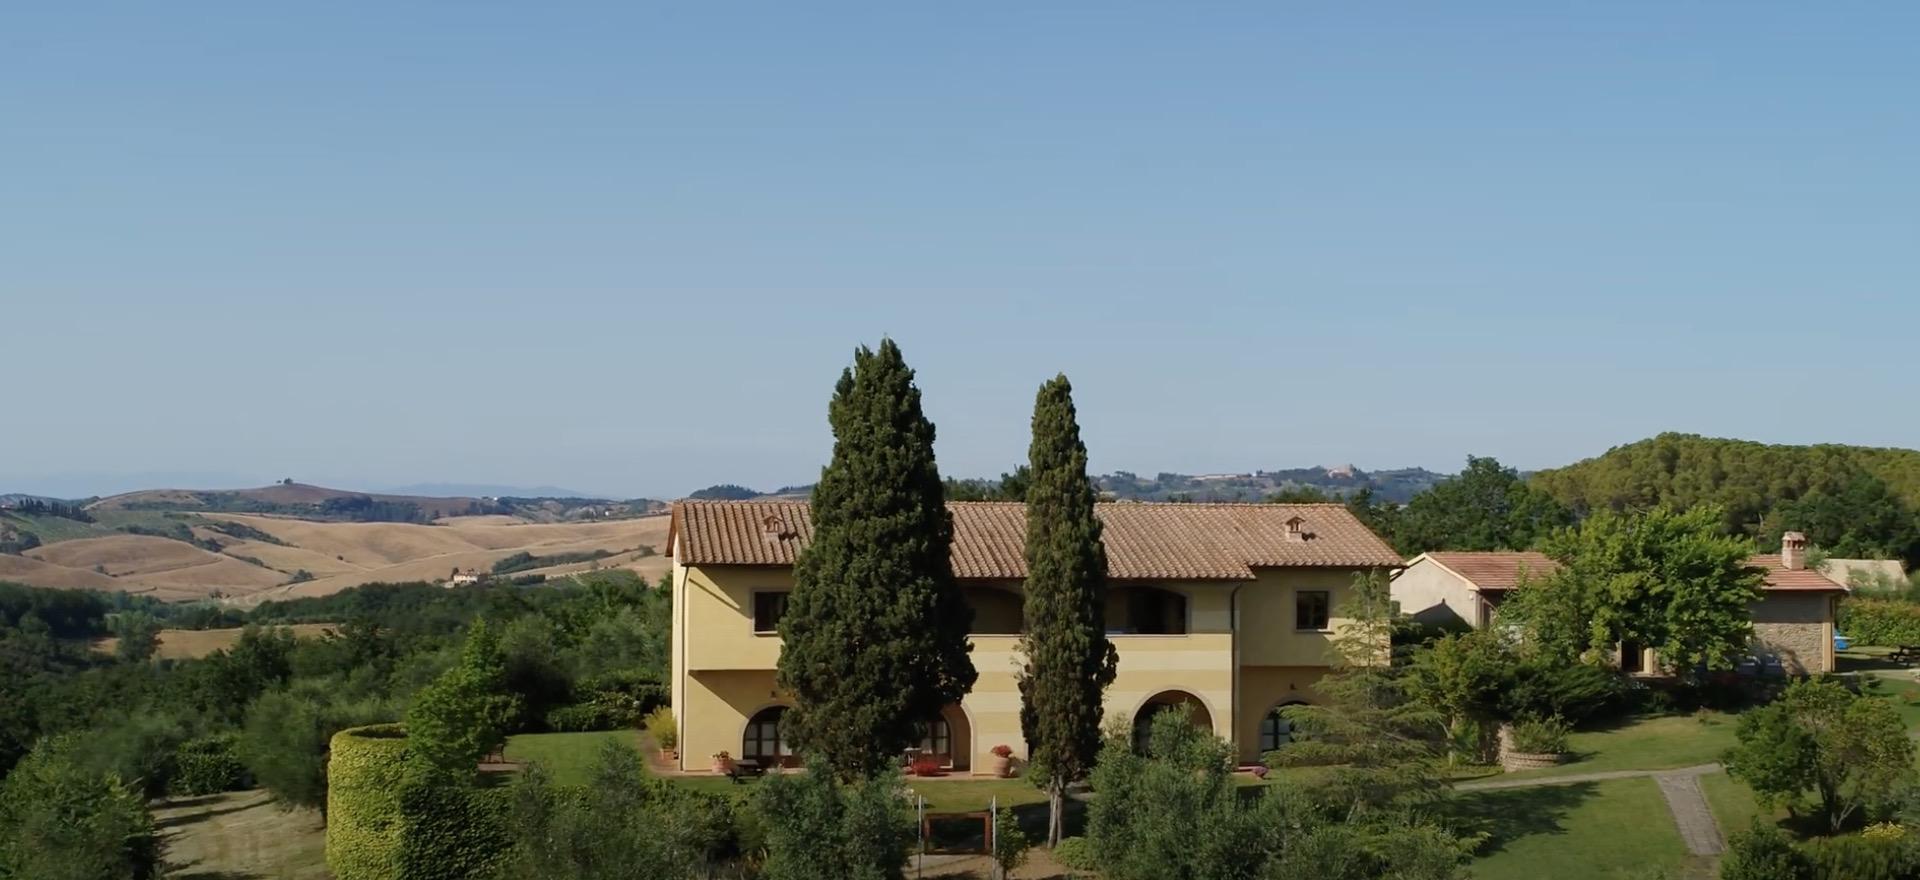 Agriturismo Tuscany Quiet agriturismo in Tuscany between vineyards